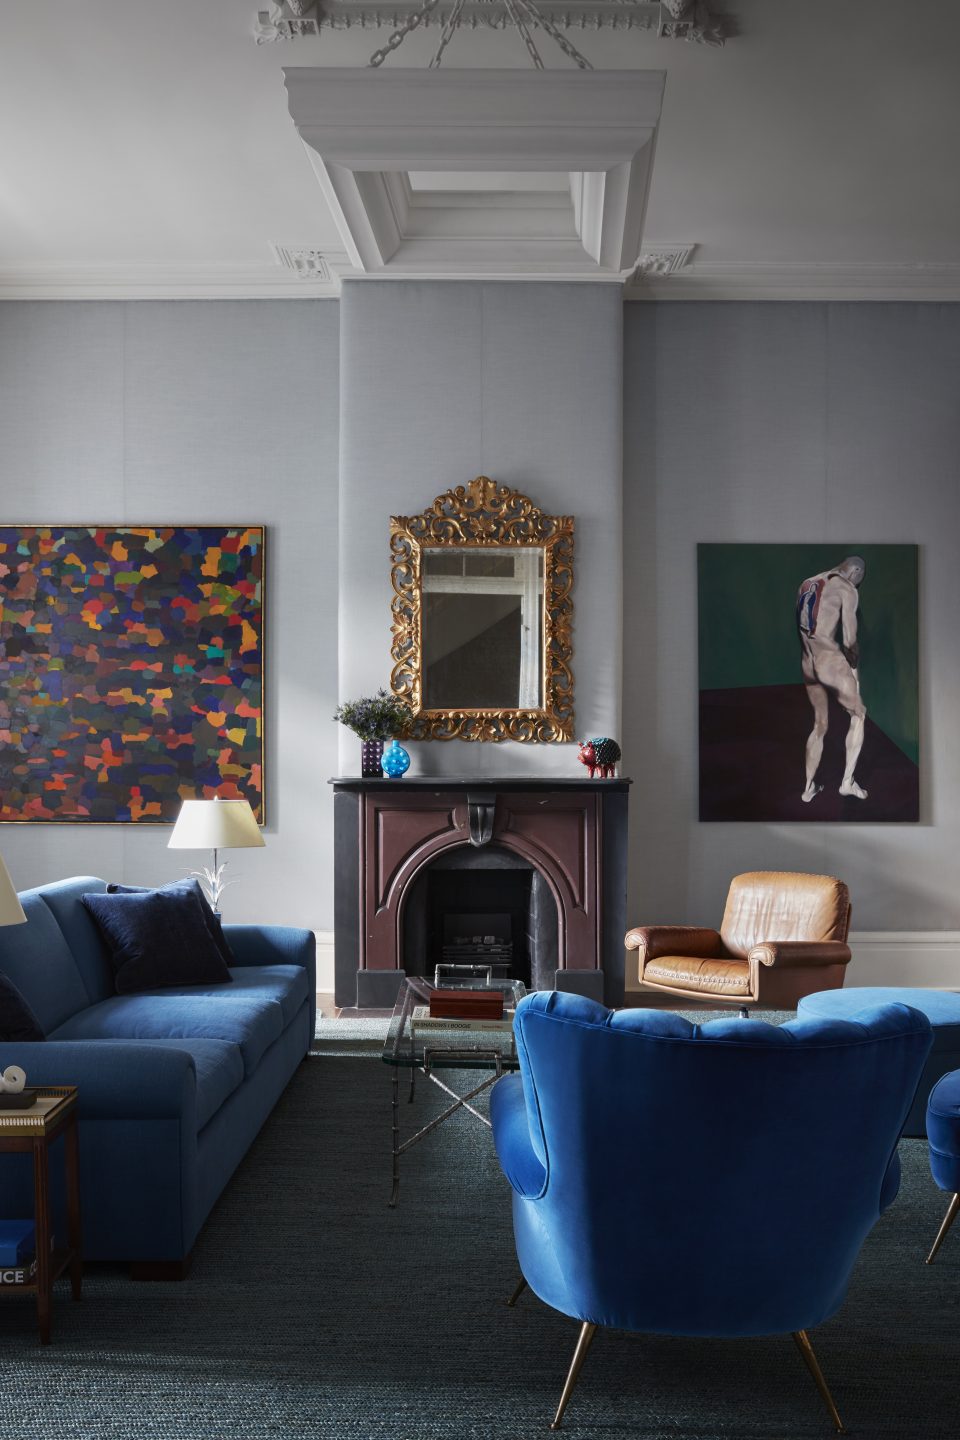 Shawn Henderson Goes Big and Bold in an Art-Filled New Orleans Mansion